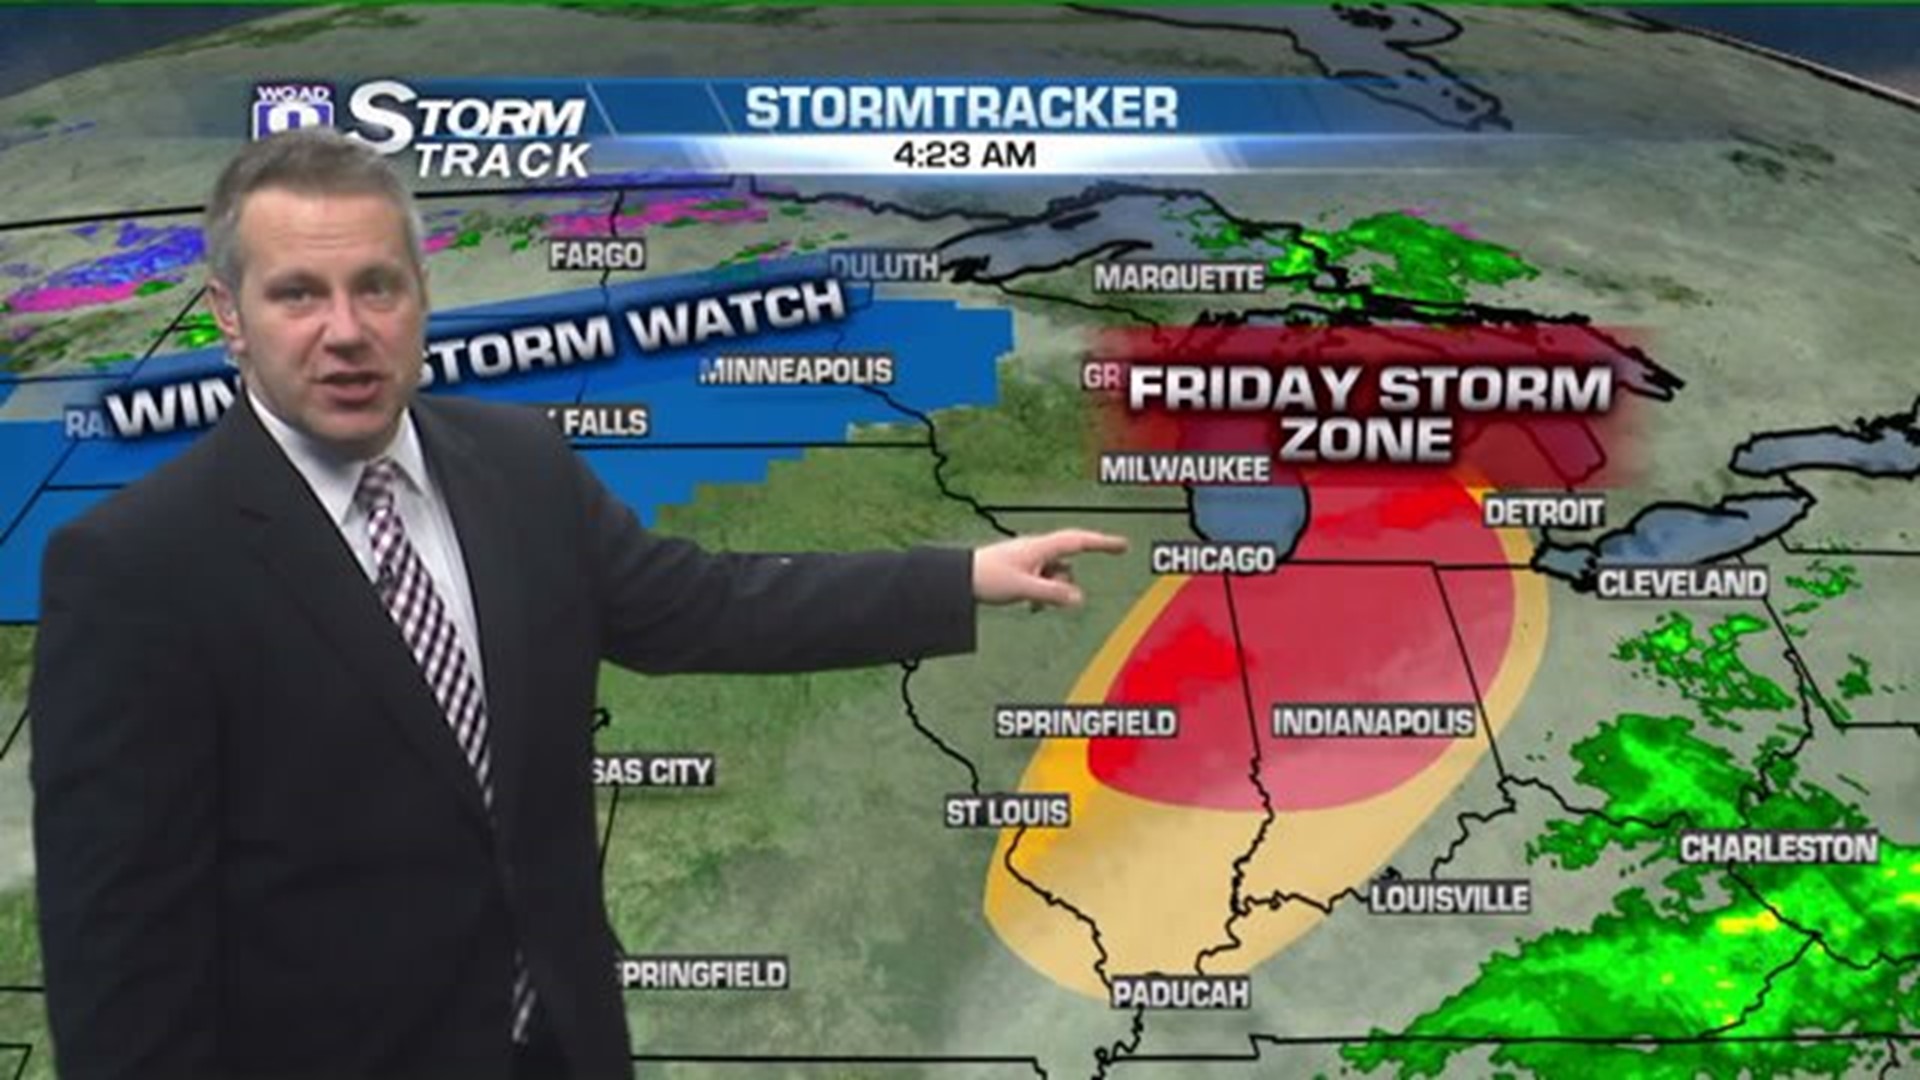 Quad Cities in a safe zone when it comes to this big storm system